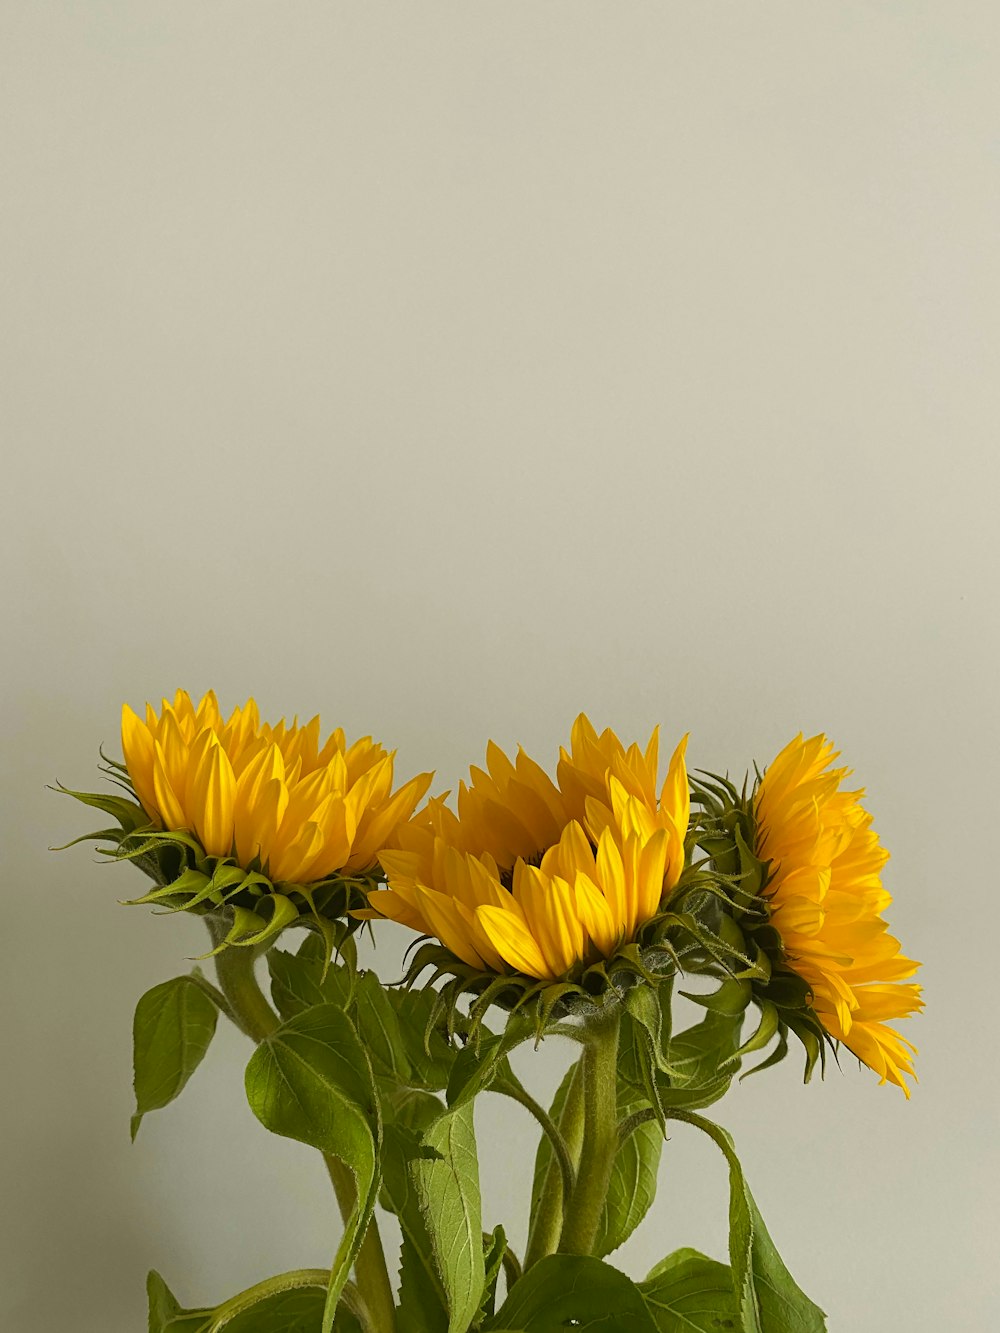 three yellow sunflowers in a vase on a table